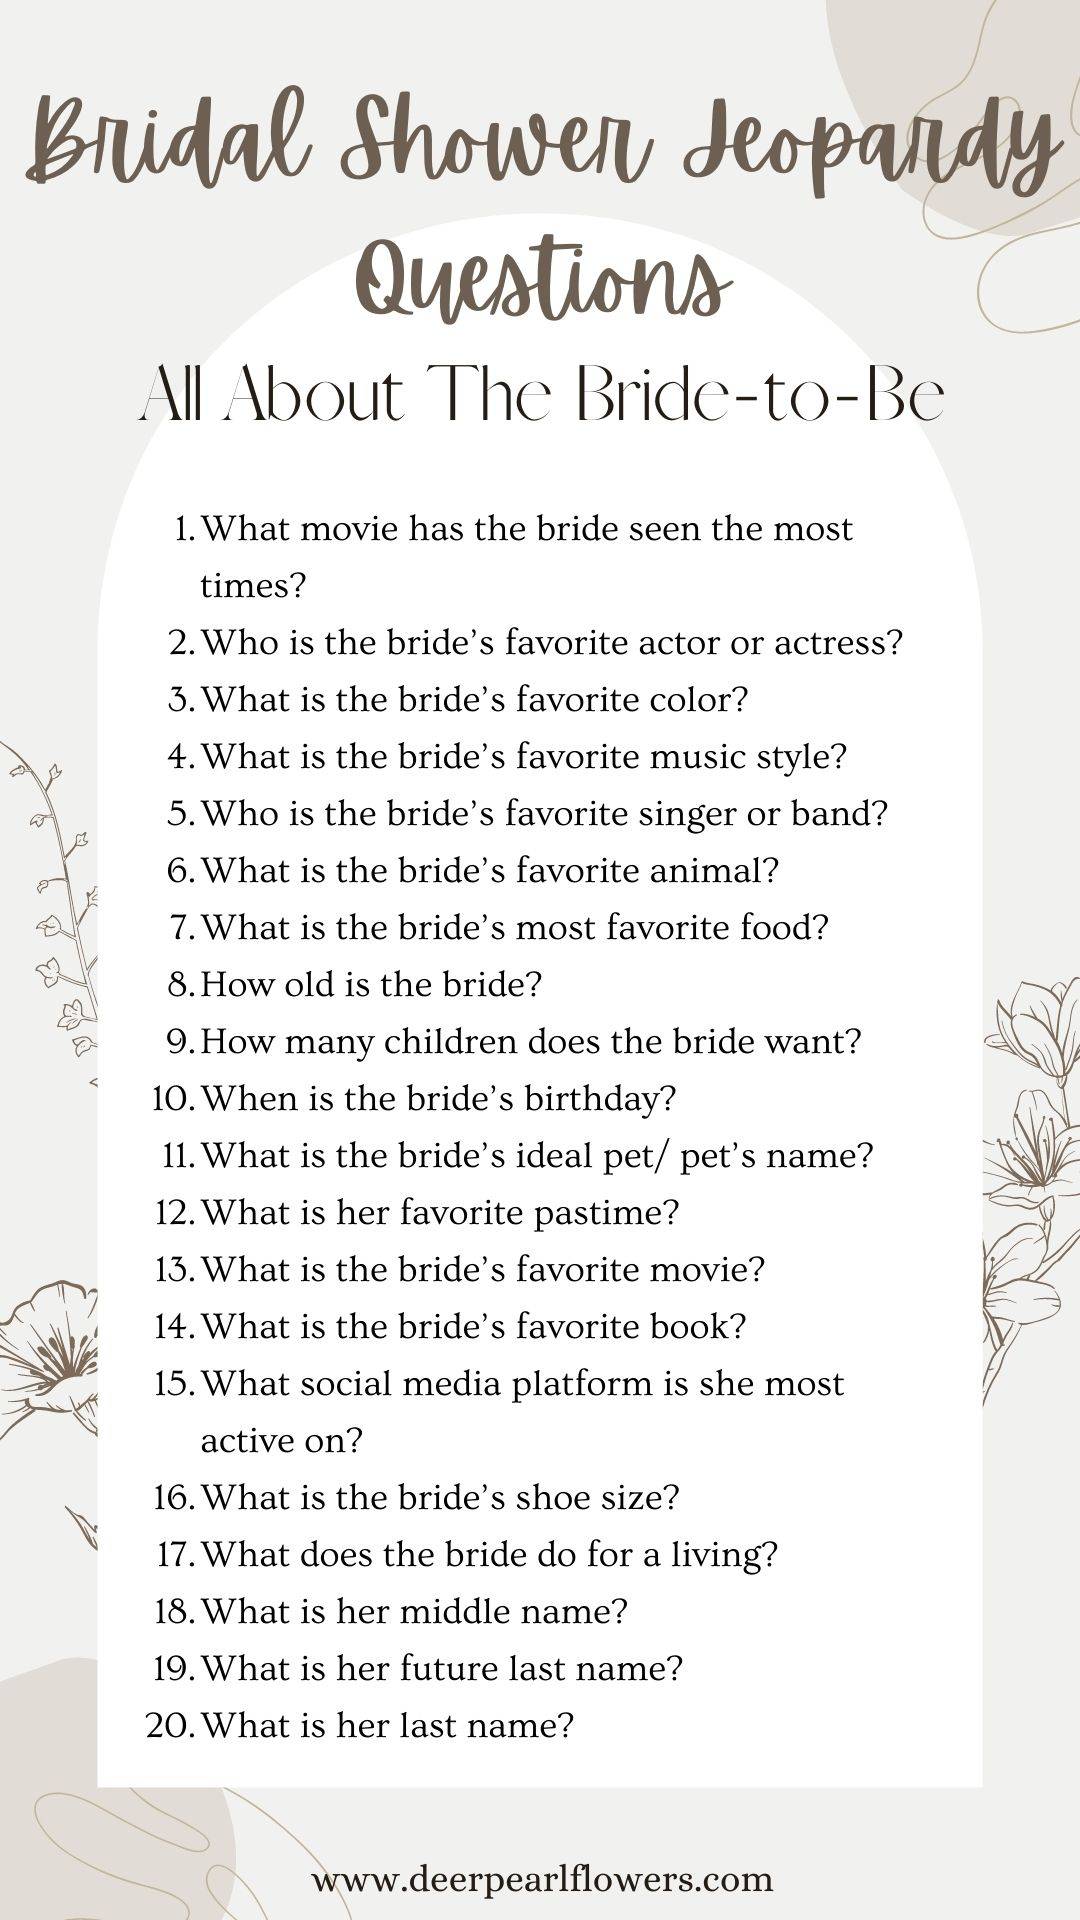 Bridal Shower Jeopardy Questions about the bride-to-be